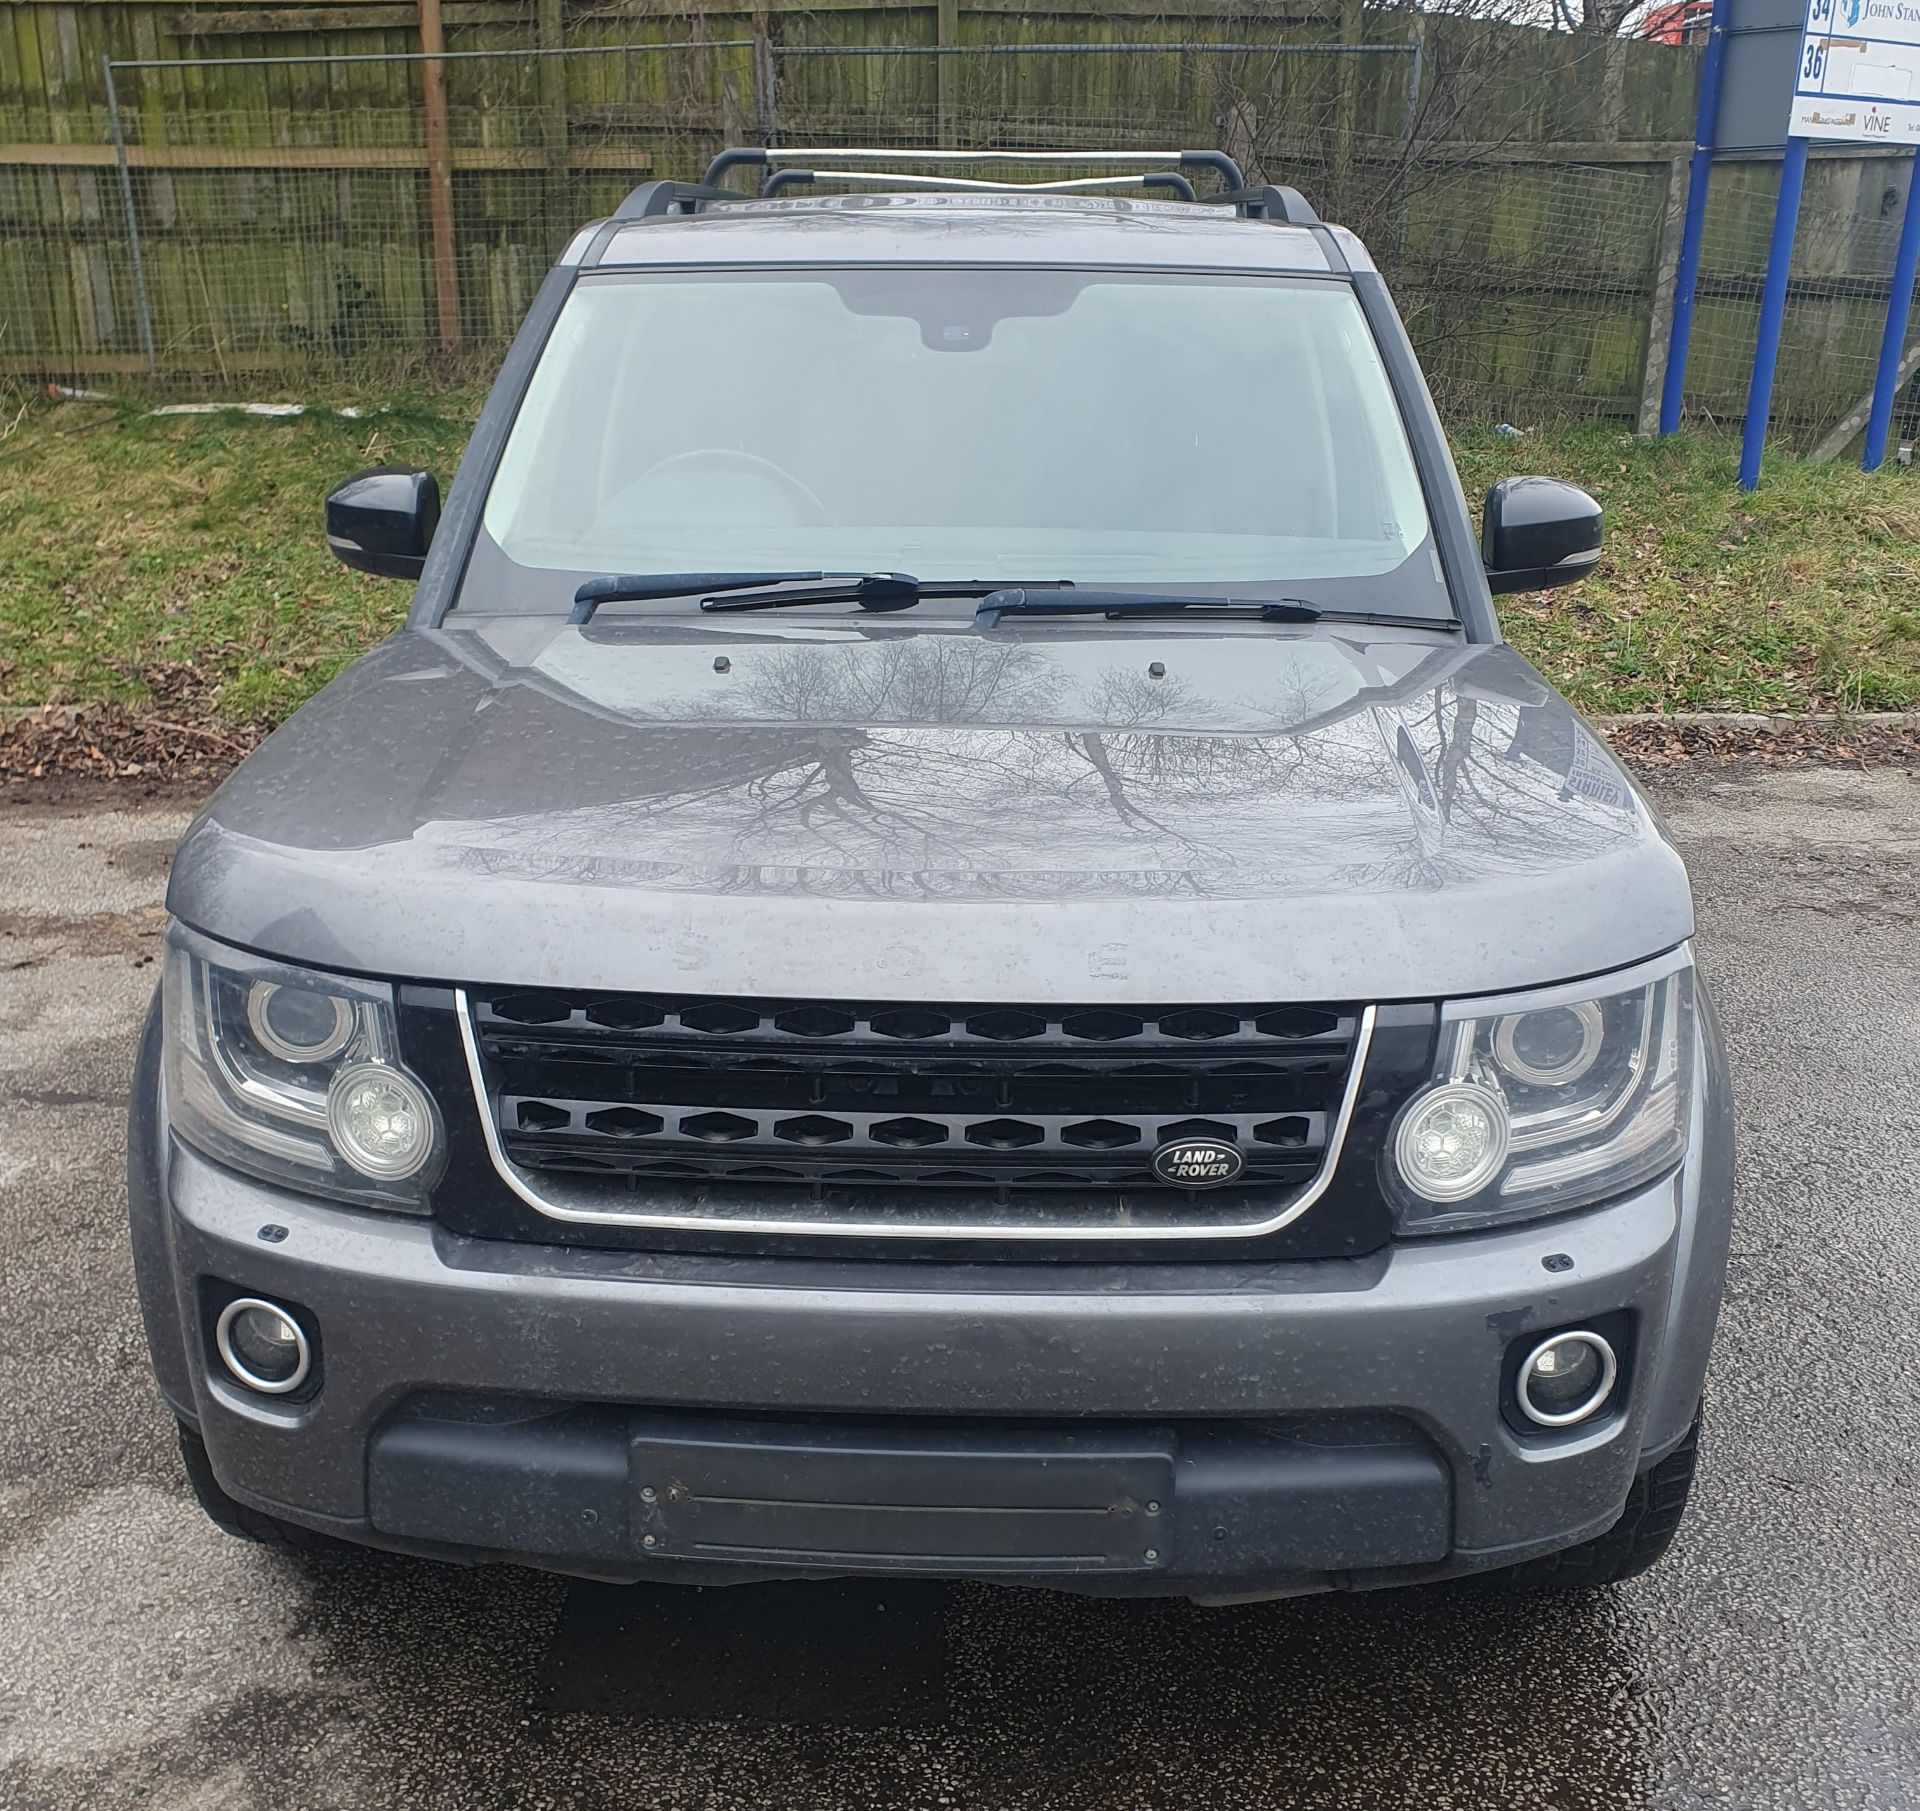 Land Rover Discovery Commercial | WU15 NZN | Light 4x4 Utility | Grey | | Automatic | 193,533 Miles - Image 2 of 22